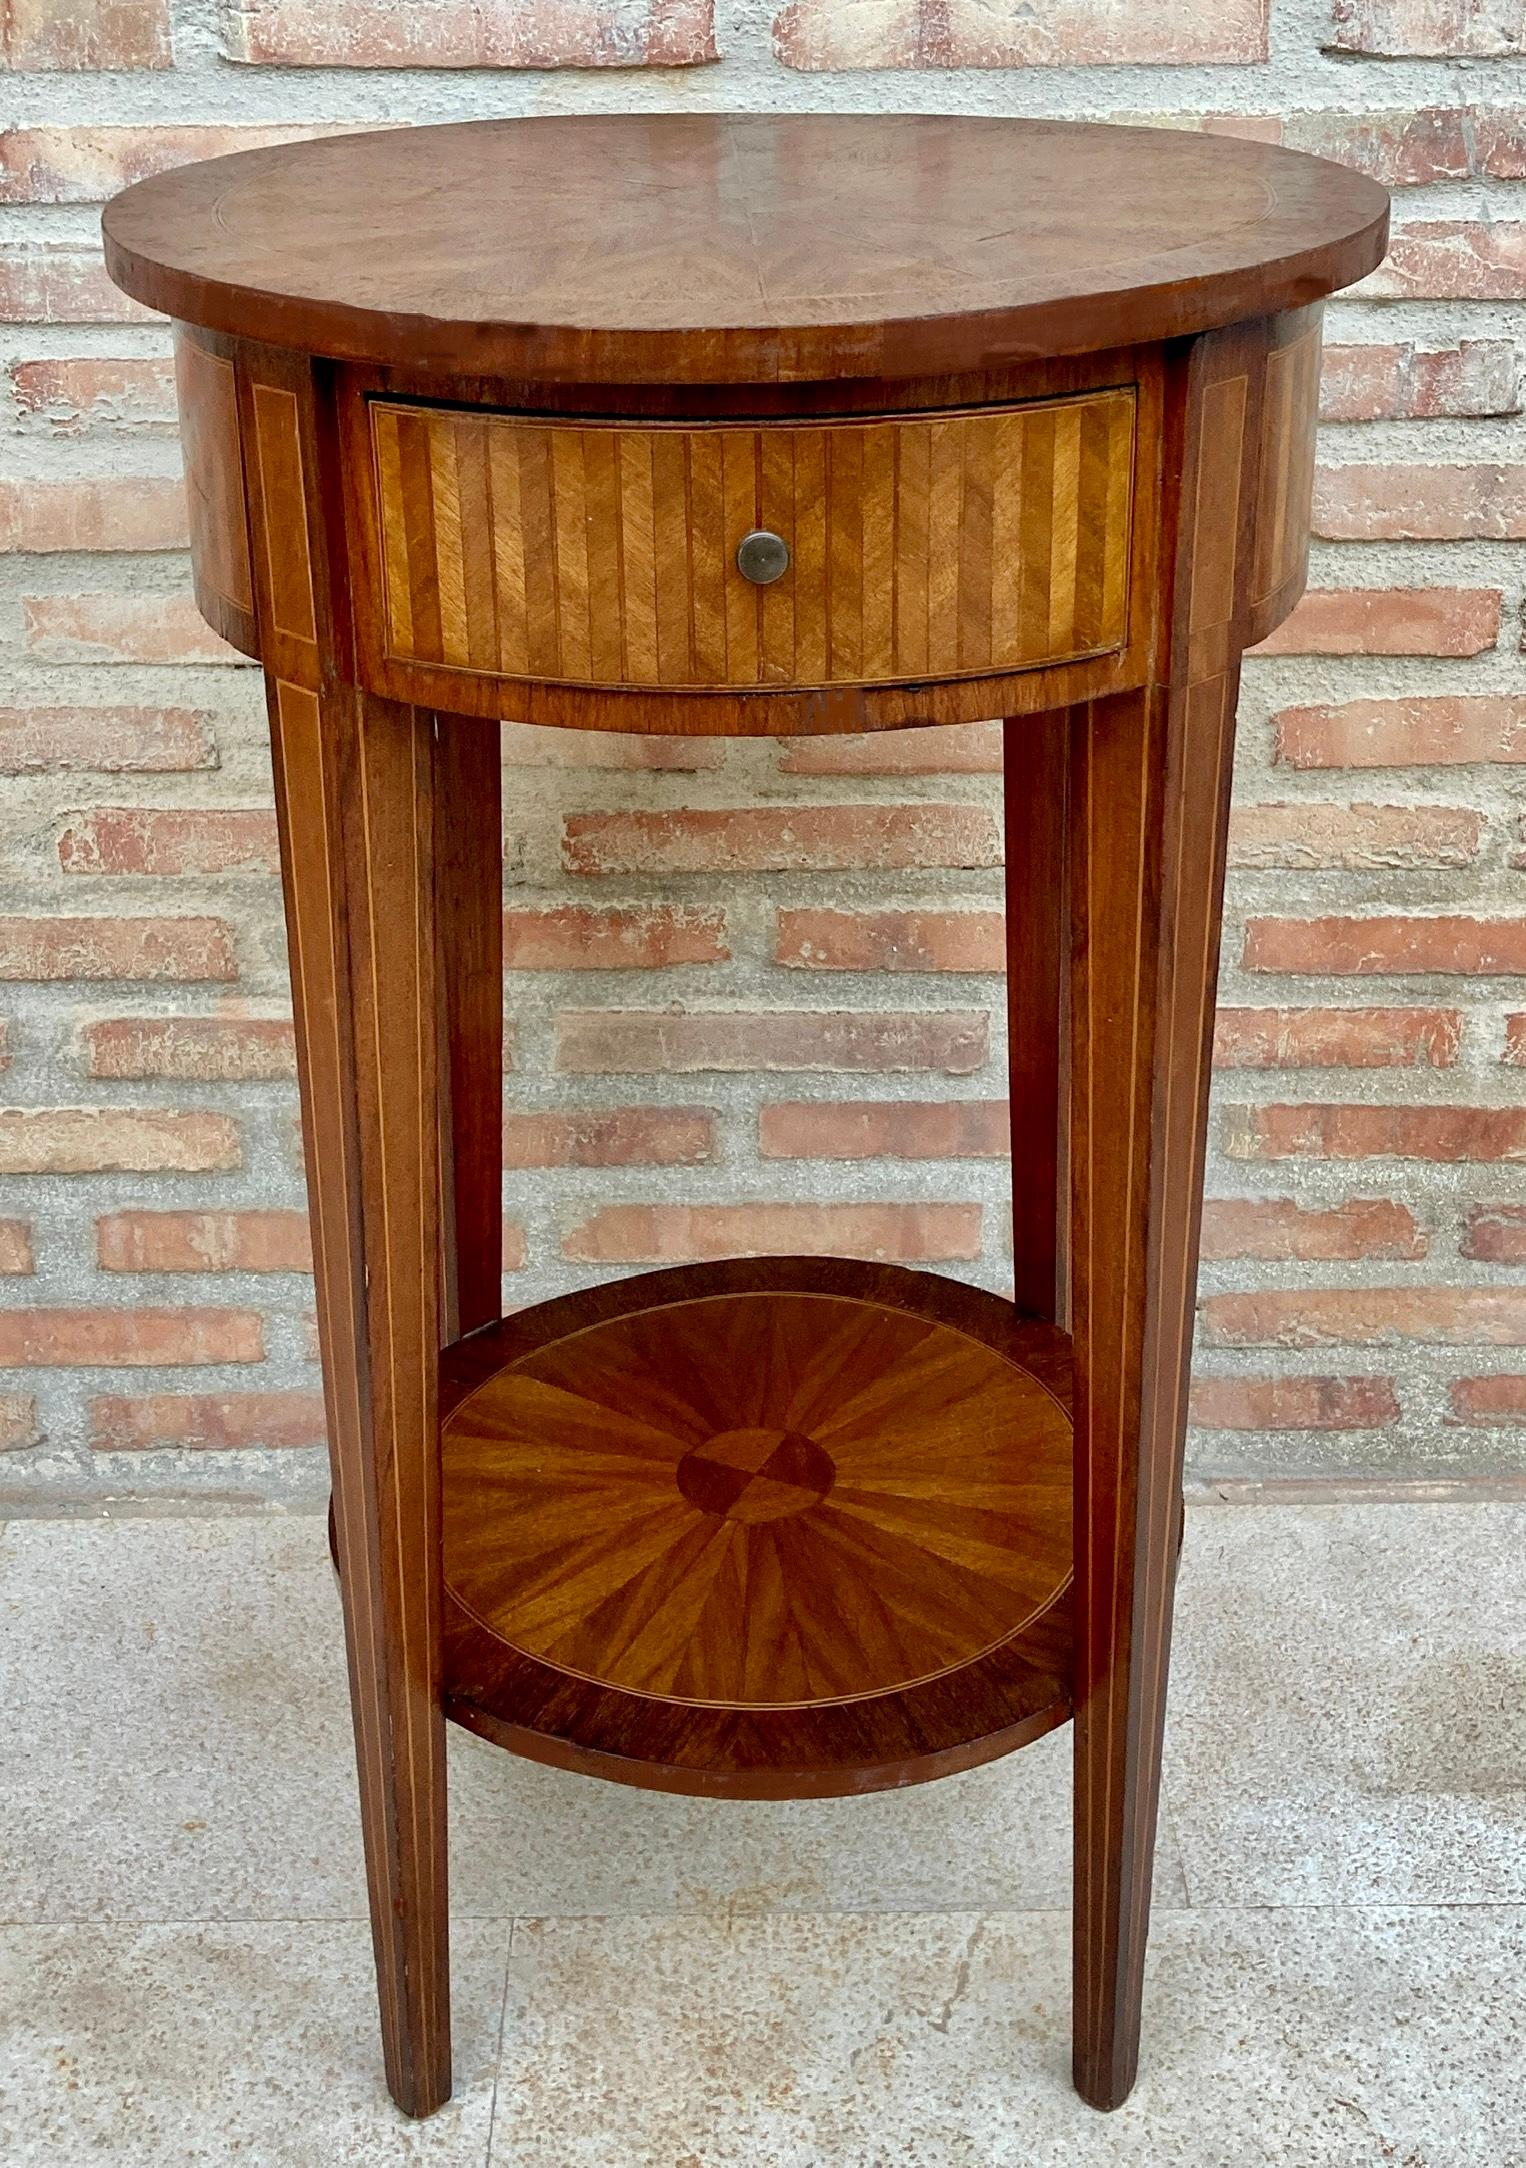 French Provincial French Round Side Table in Walnut and Marquetry 1940s For Sale